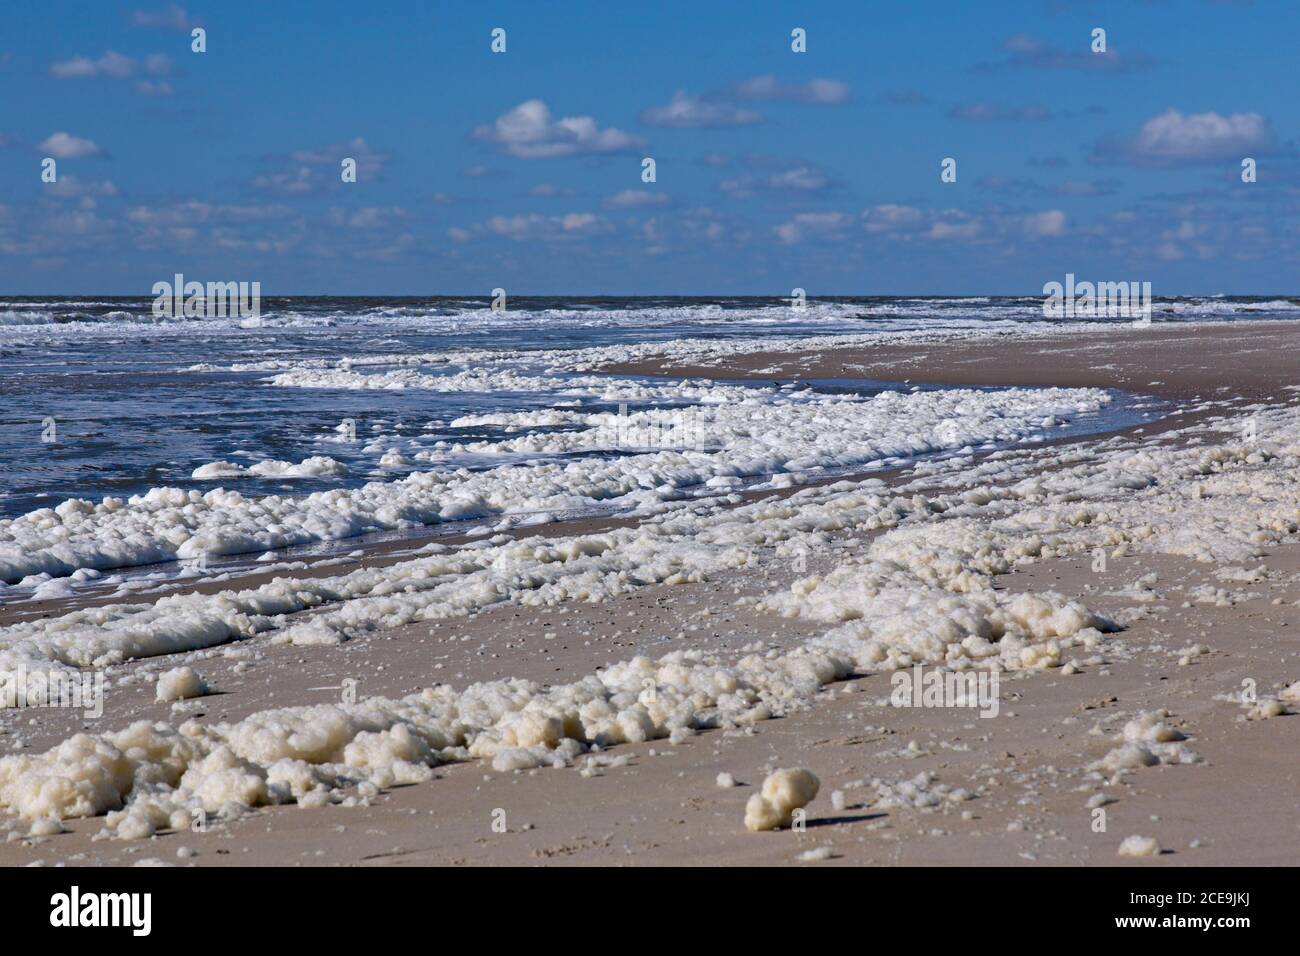 Sea foam / beach foam / spume, created by the agitation of seawater and offshore breakdown of algal blooms, washed up / blown onto the beach in spring Stock Photo